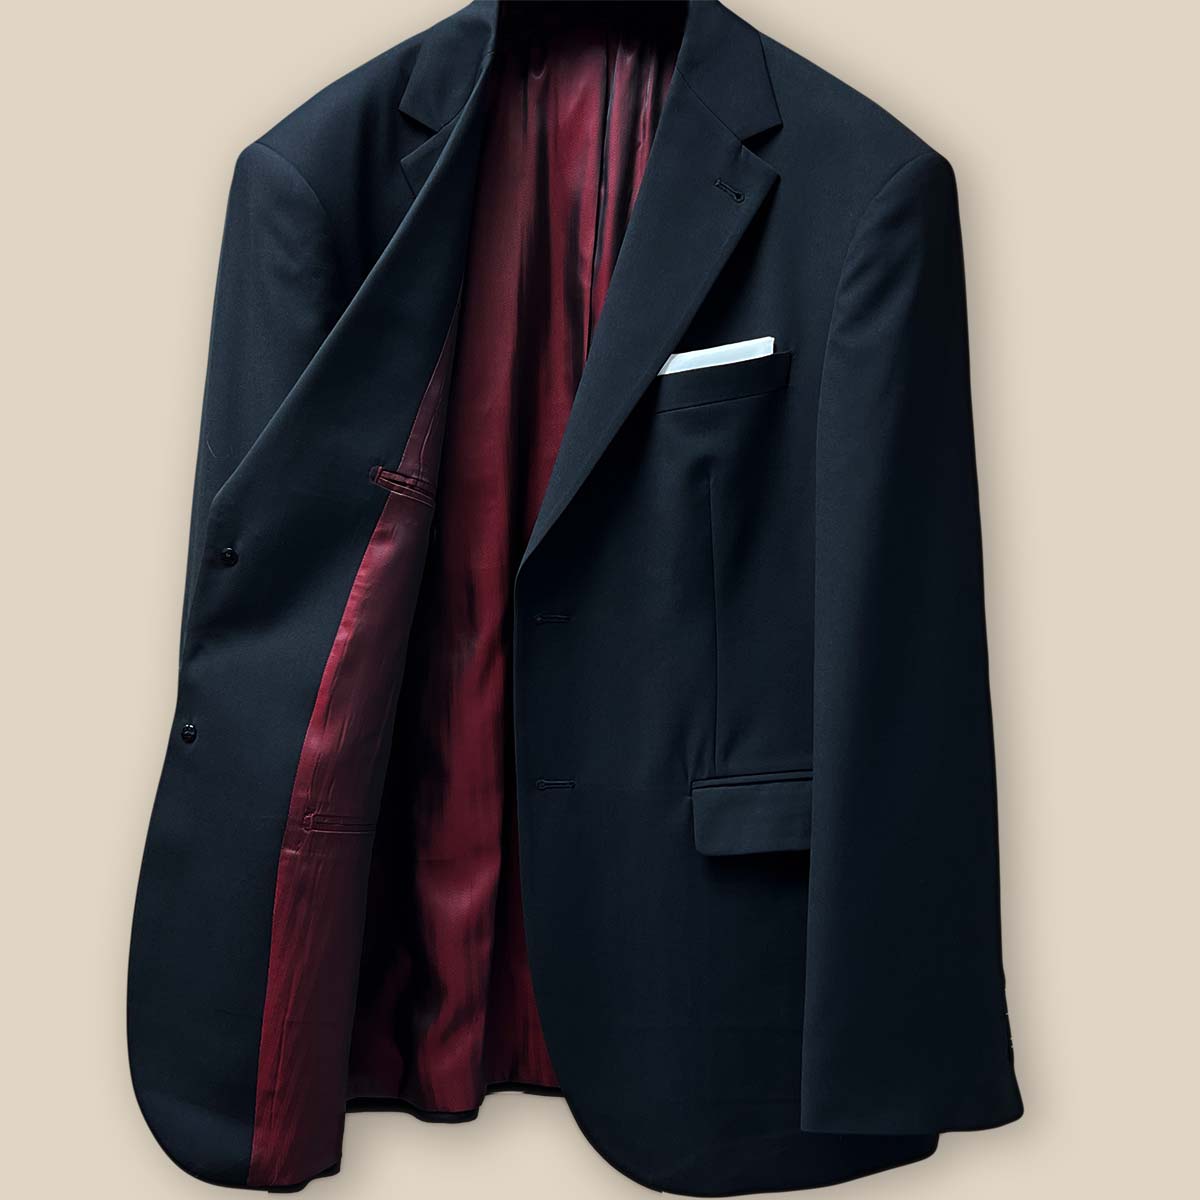 Inside view of the right side of the jacket emphasizing the quality of the maroon silk bemberg lining.